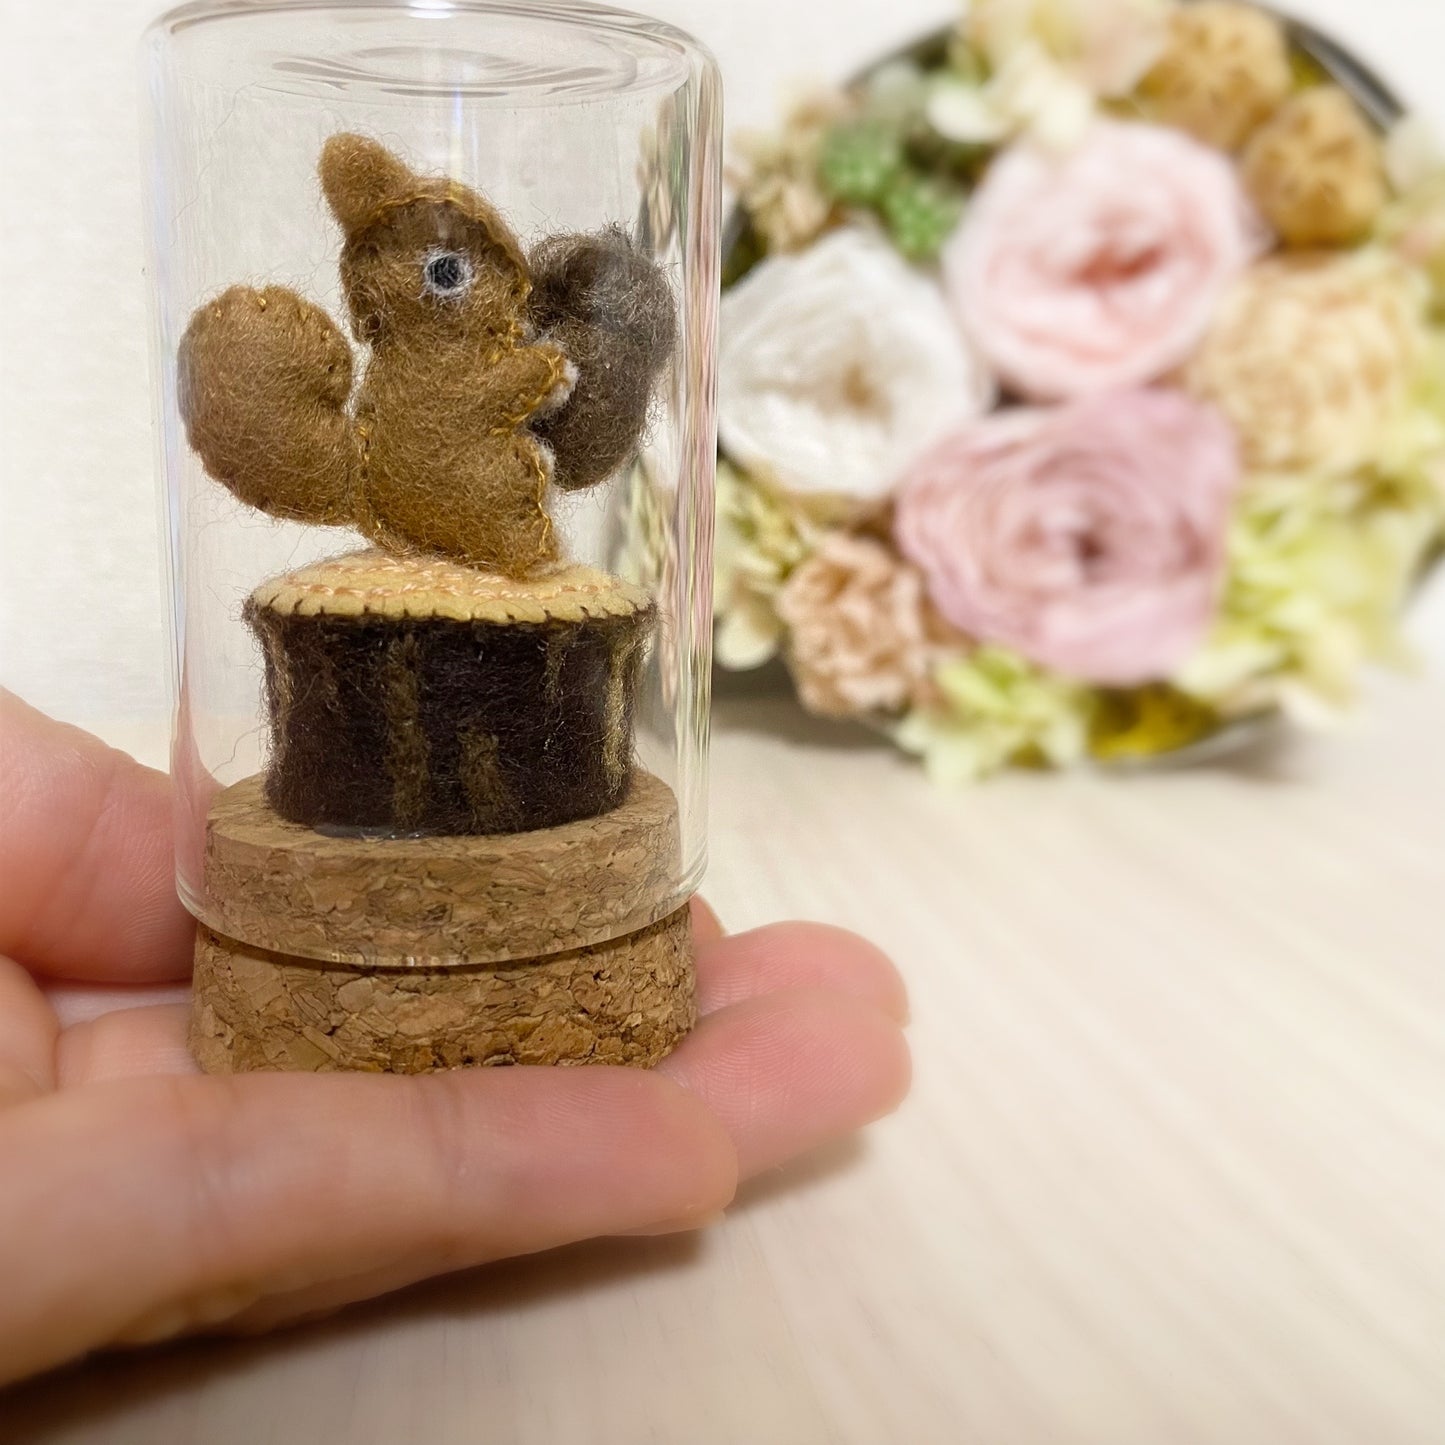 Baby squirrel in a glass bottle